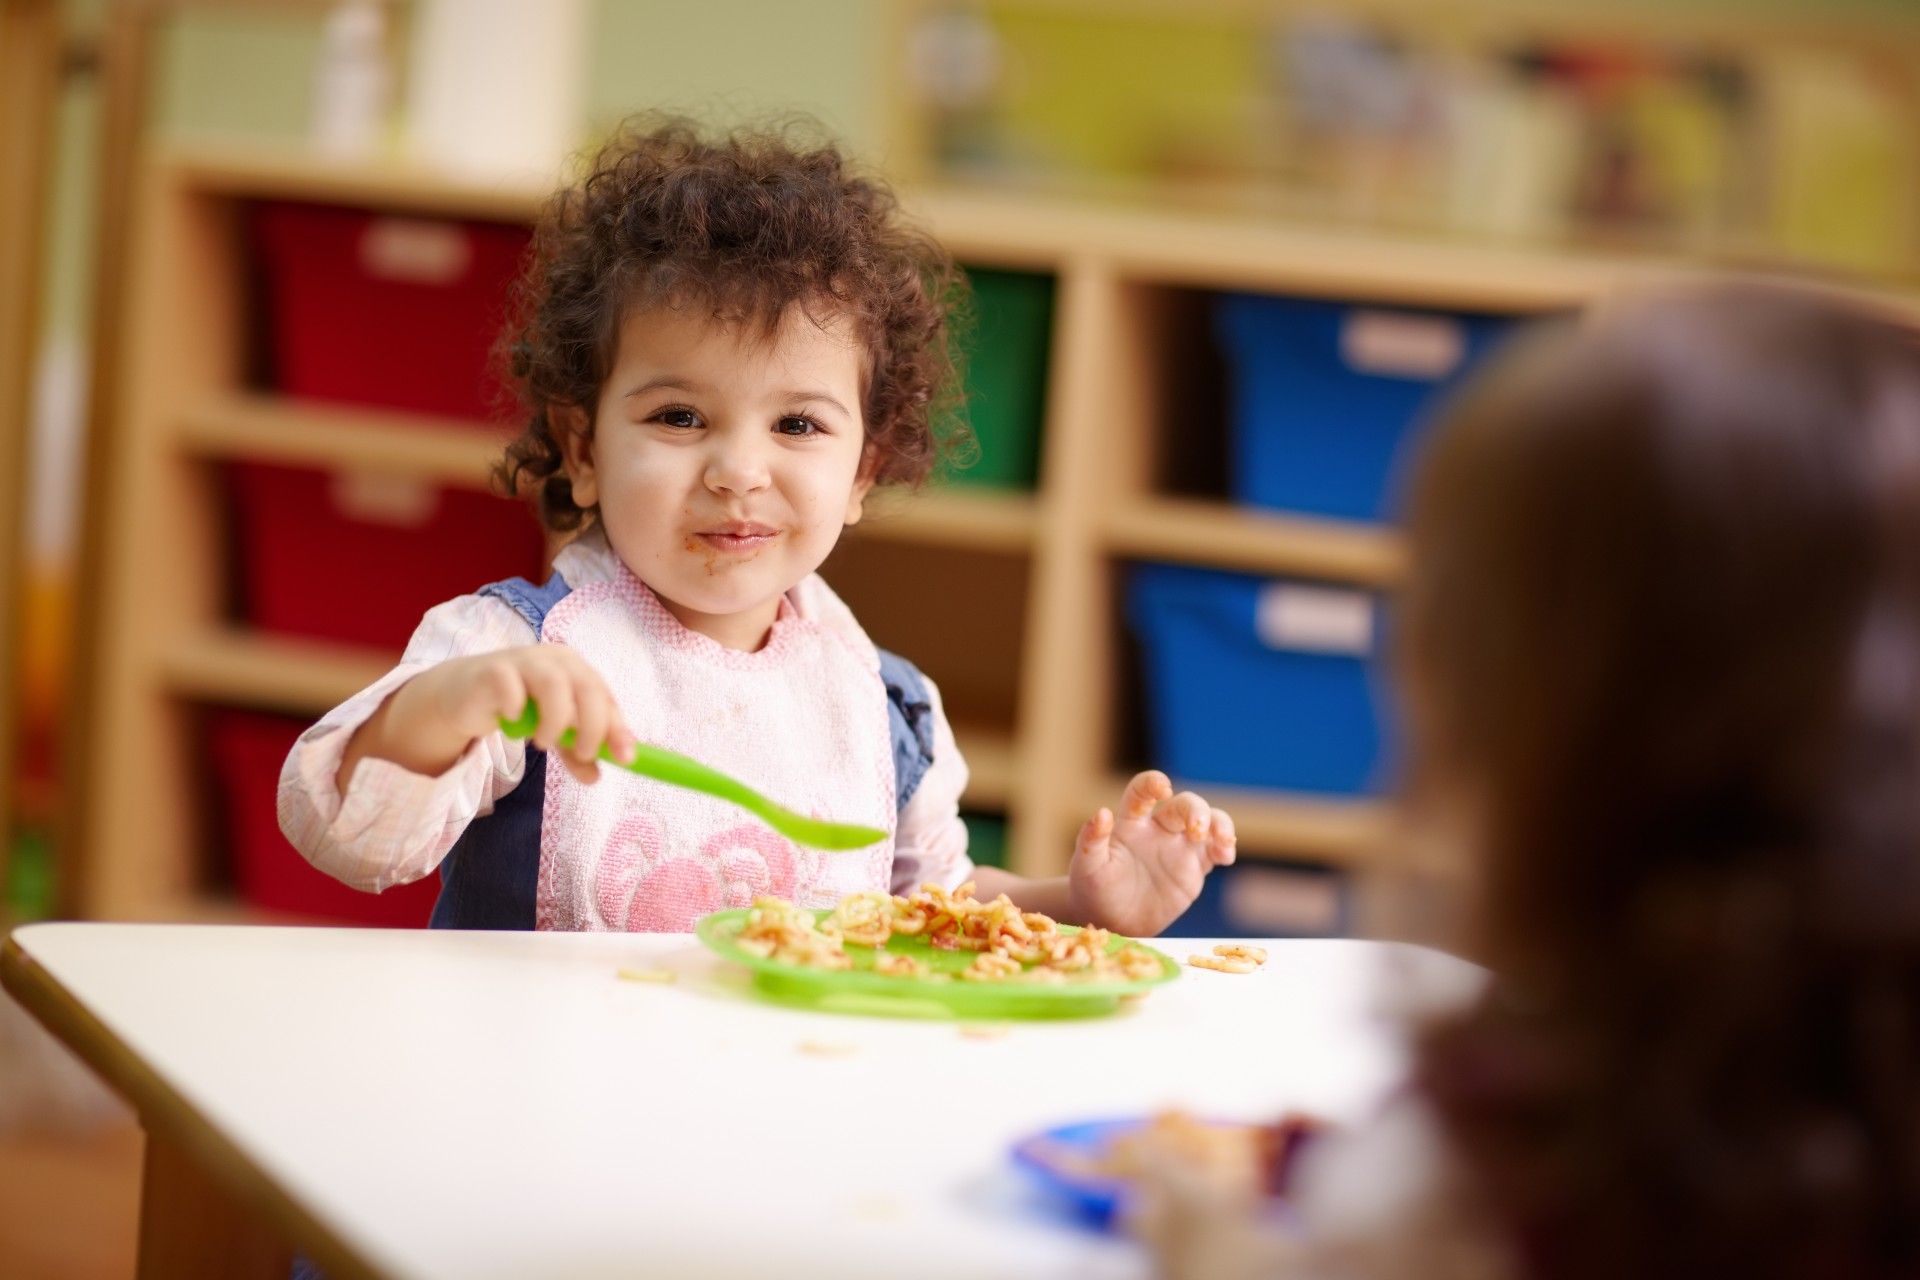 A happy young child in a bib eats while sitting at a classroom table - Feeding Our Future